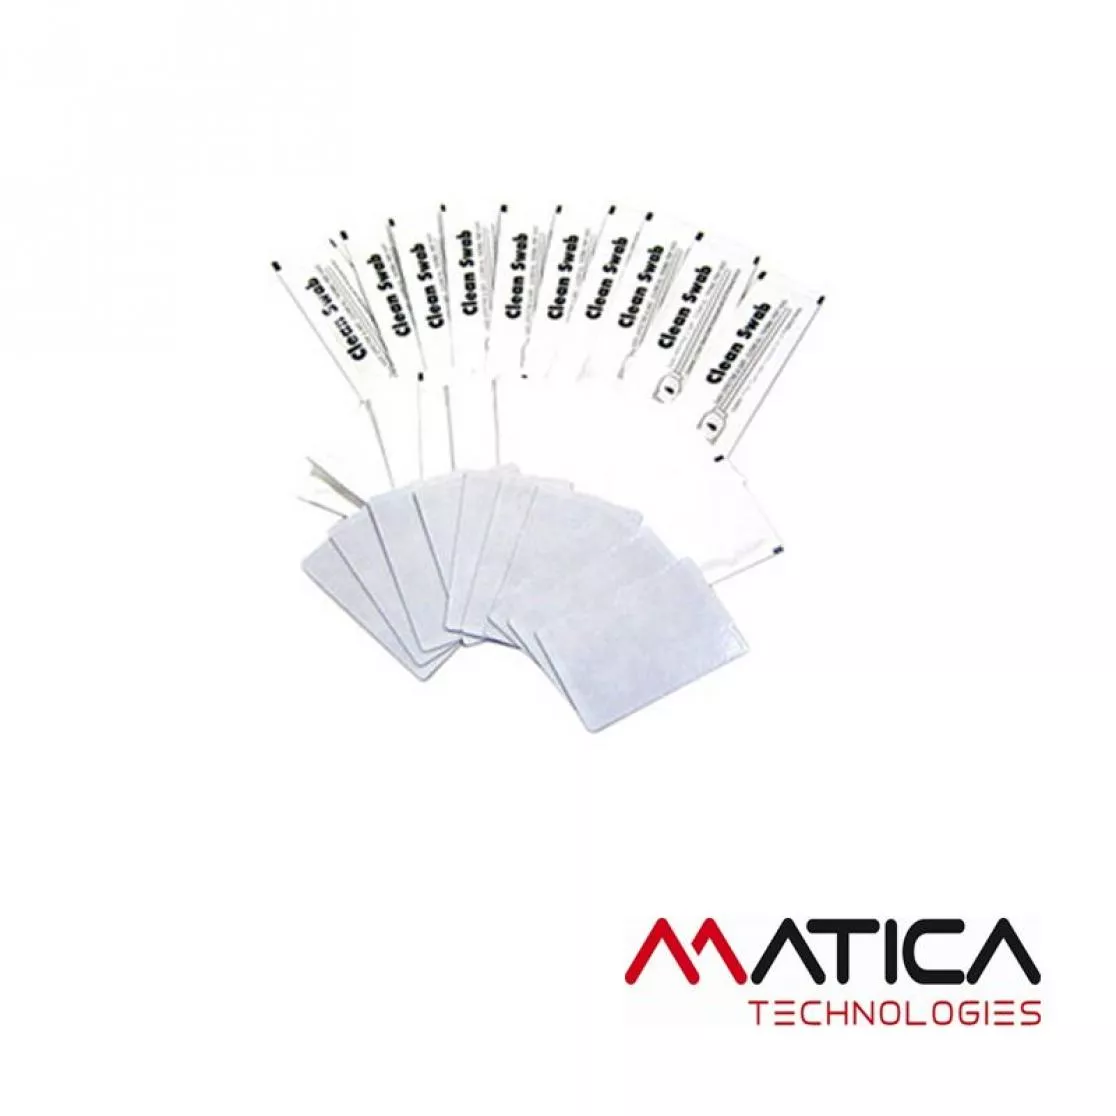 Cleaning kit for matica edisecure XID8300 card printer